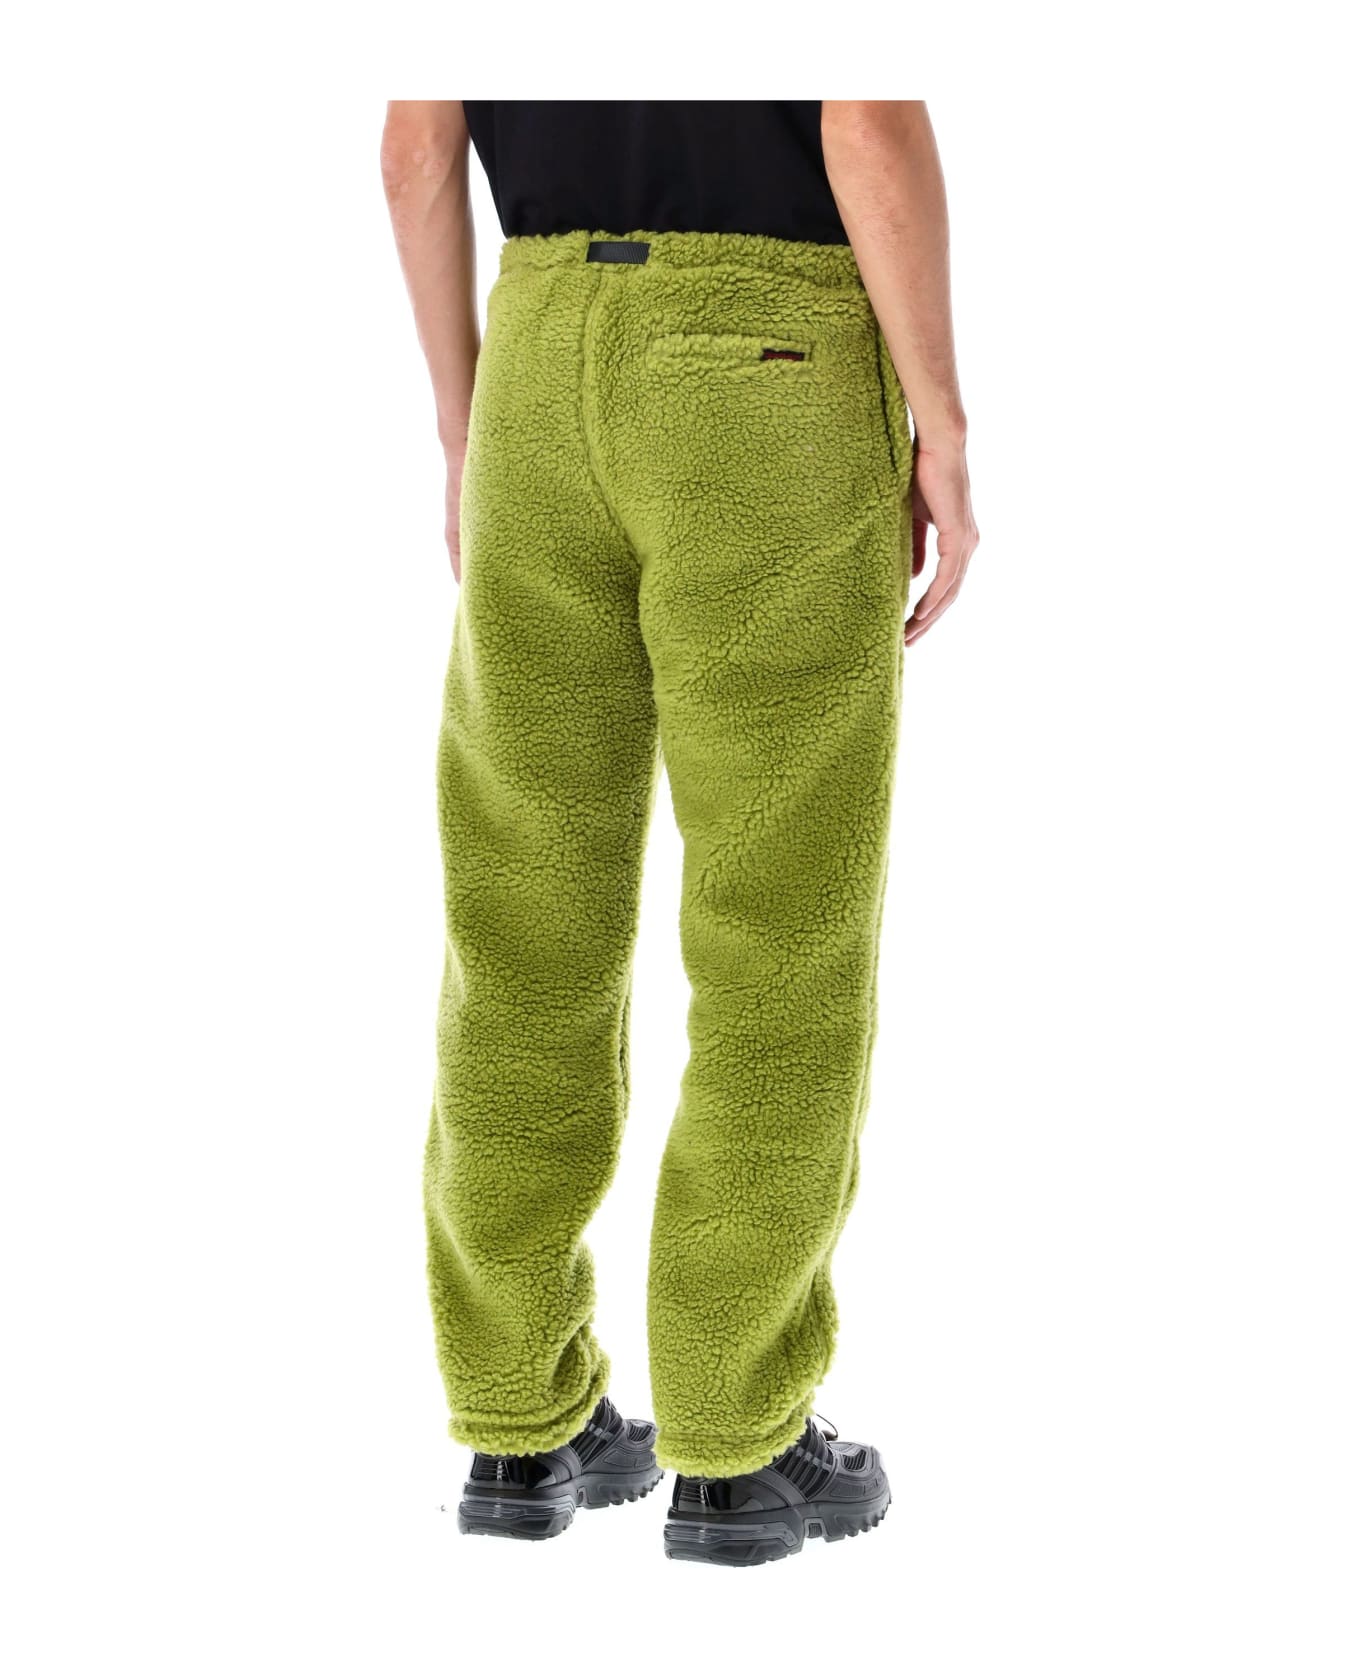 Gramicci Sherpa Pant - DUSTED LIME スウェットパンツ